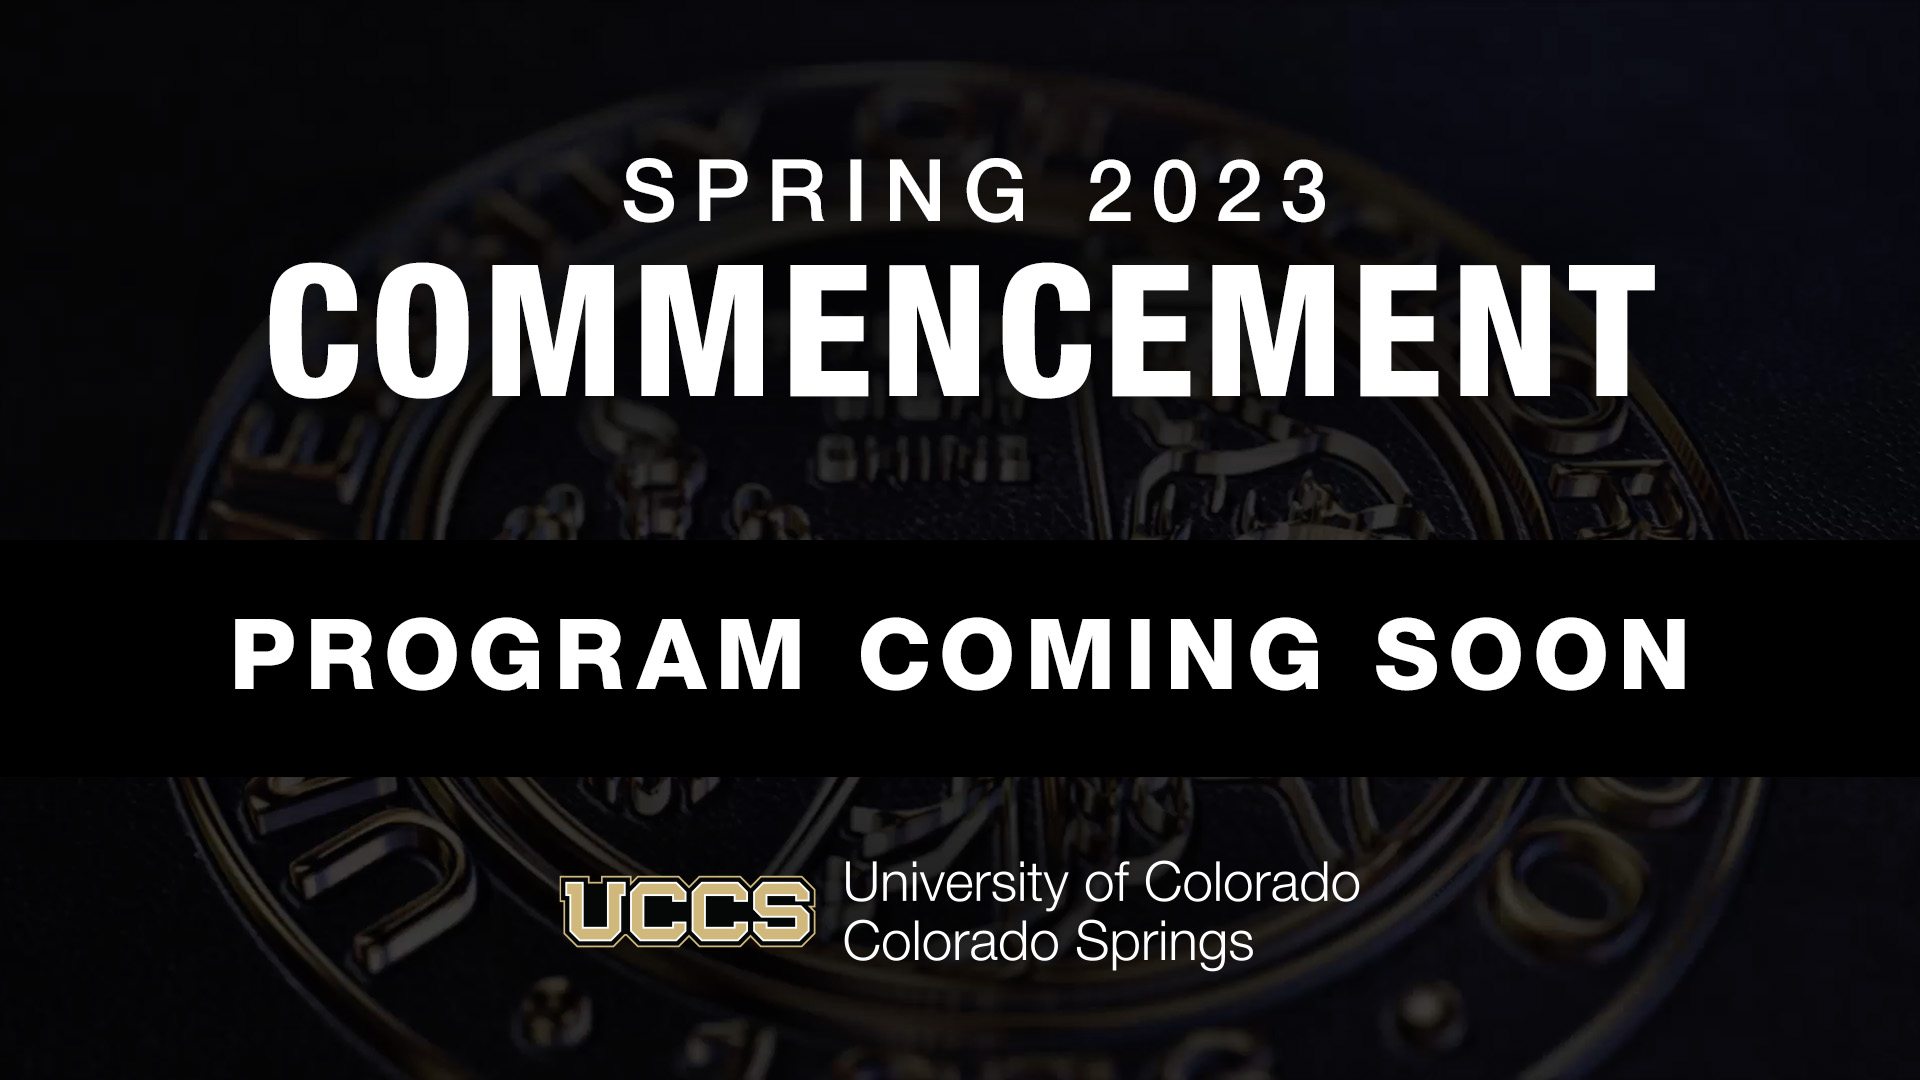 Spring 2023 Commencement Program Coming Soon